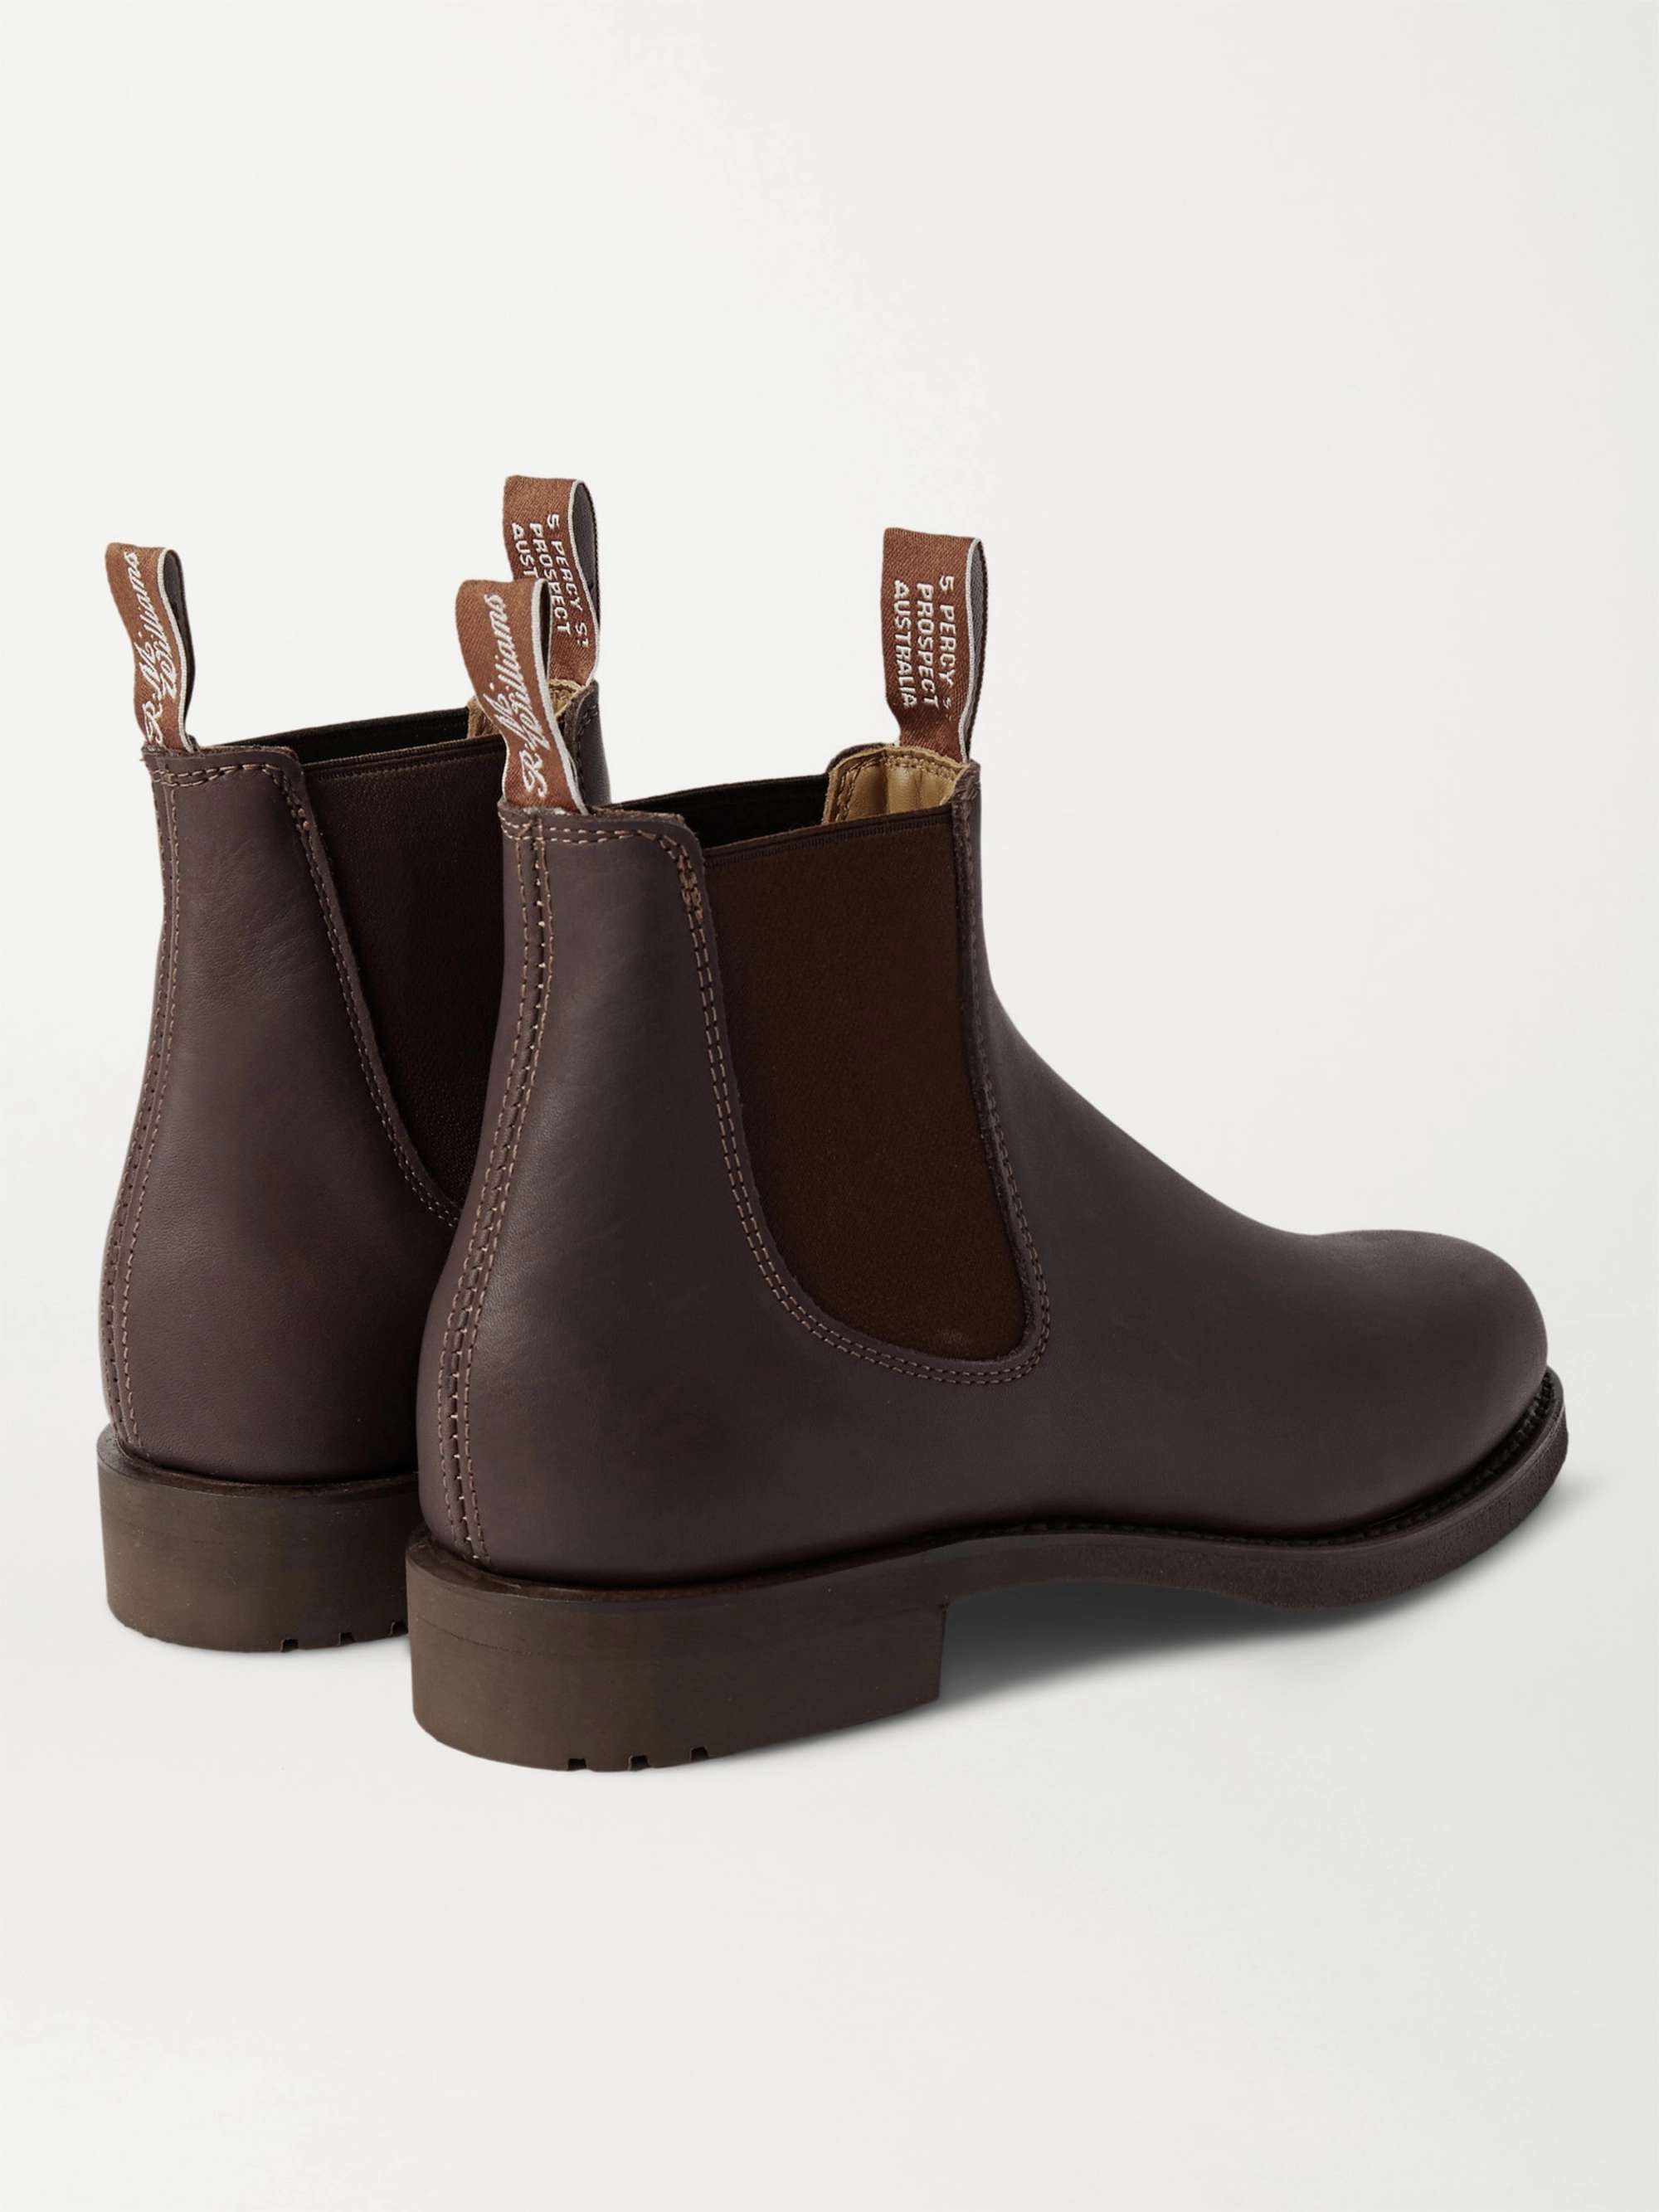 R.M.WILLIAMS Gardener Whole-Cut Leather Chelsea Boots